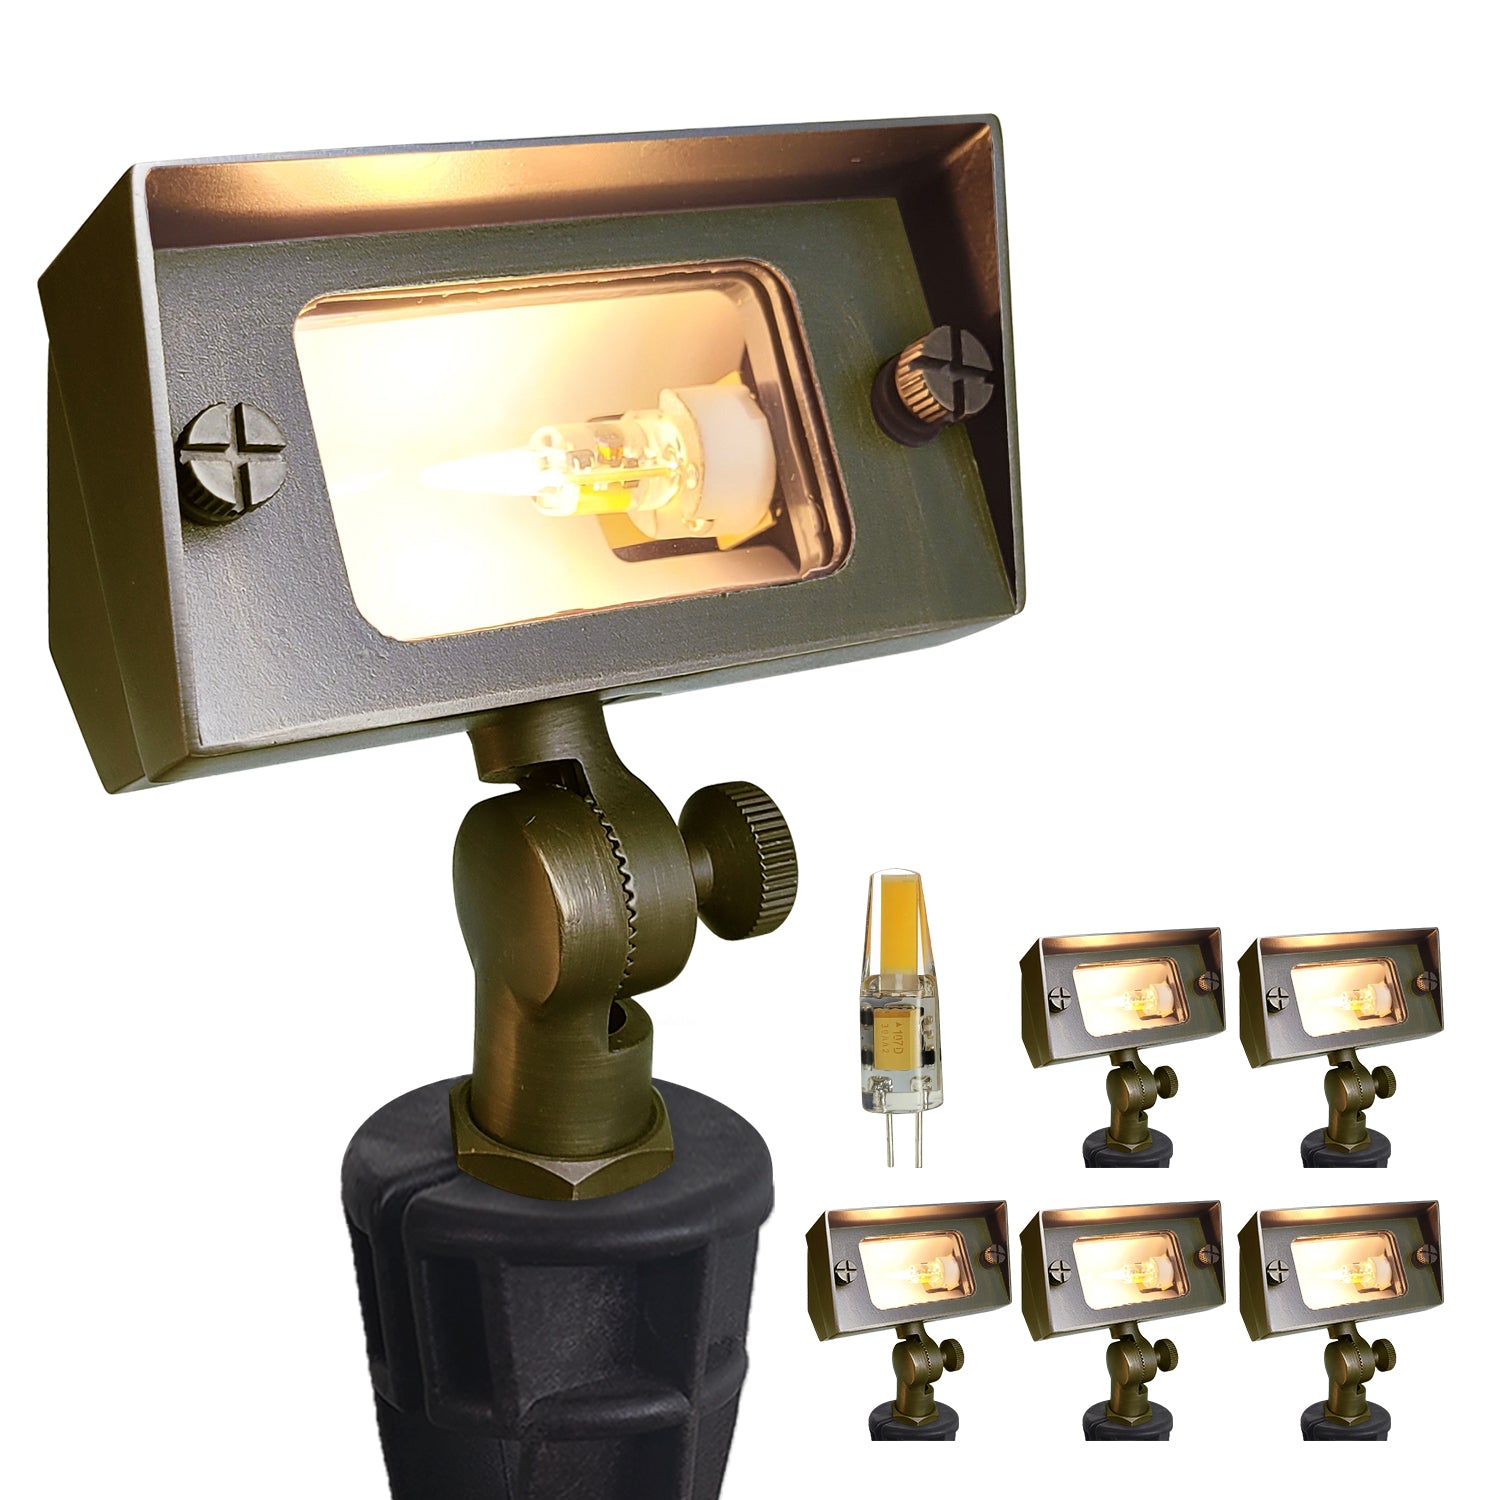 Brass outdoor mini rectangular low voltage landscape wall wash lighting COF502B with adjustable angle displayed on white background.